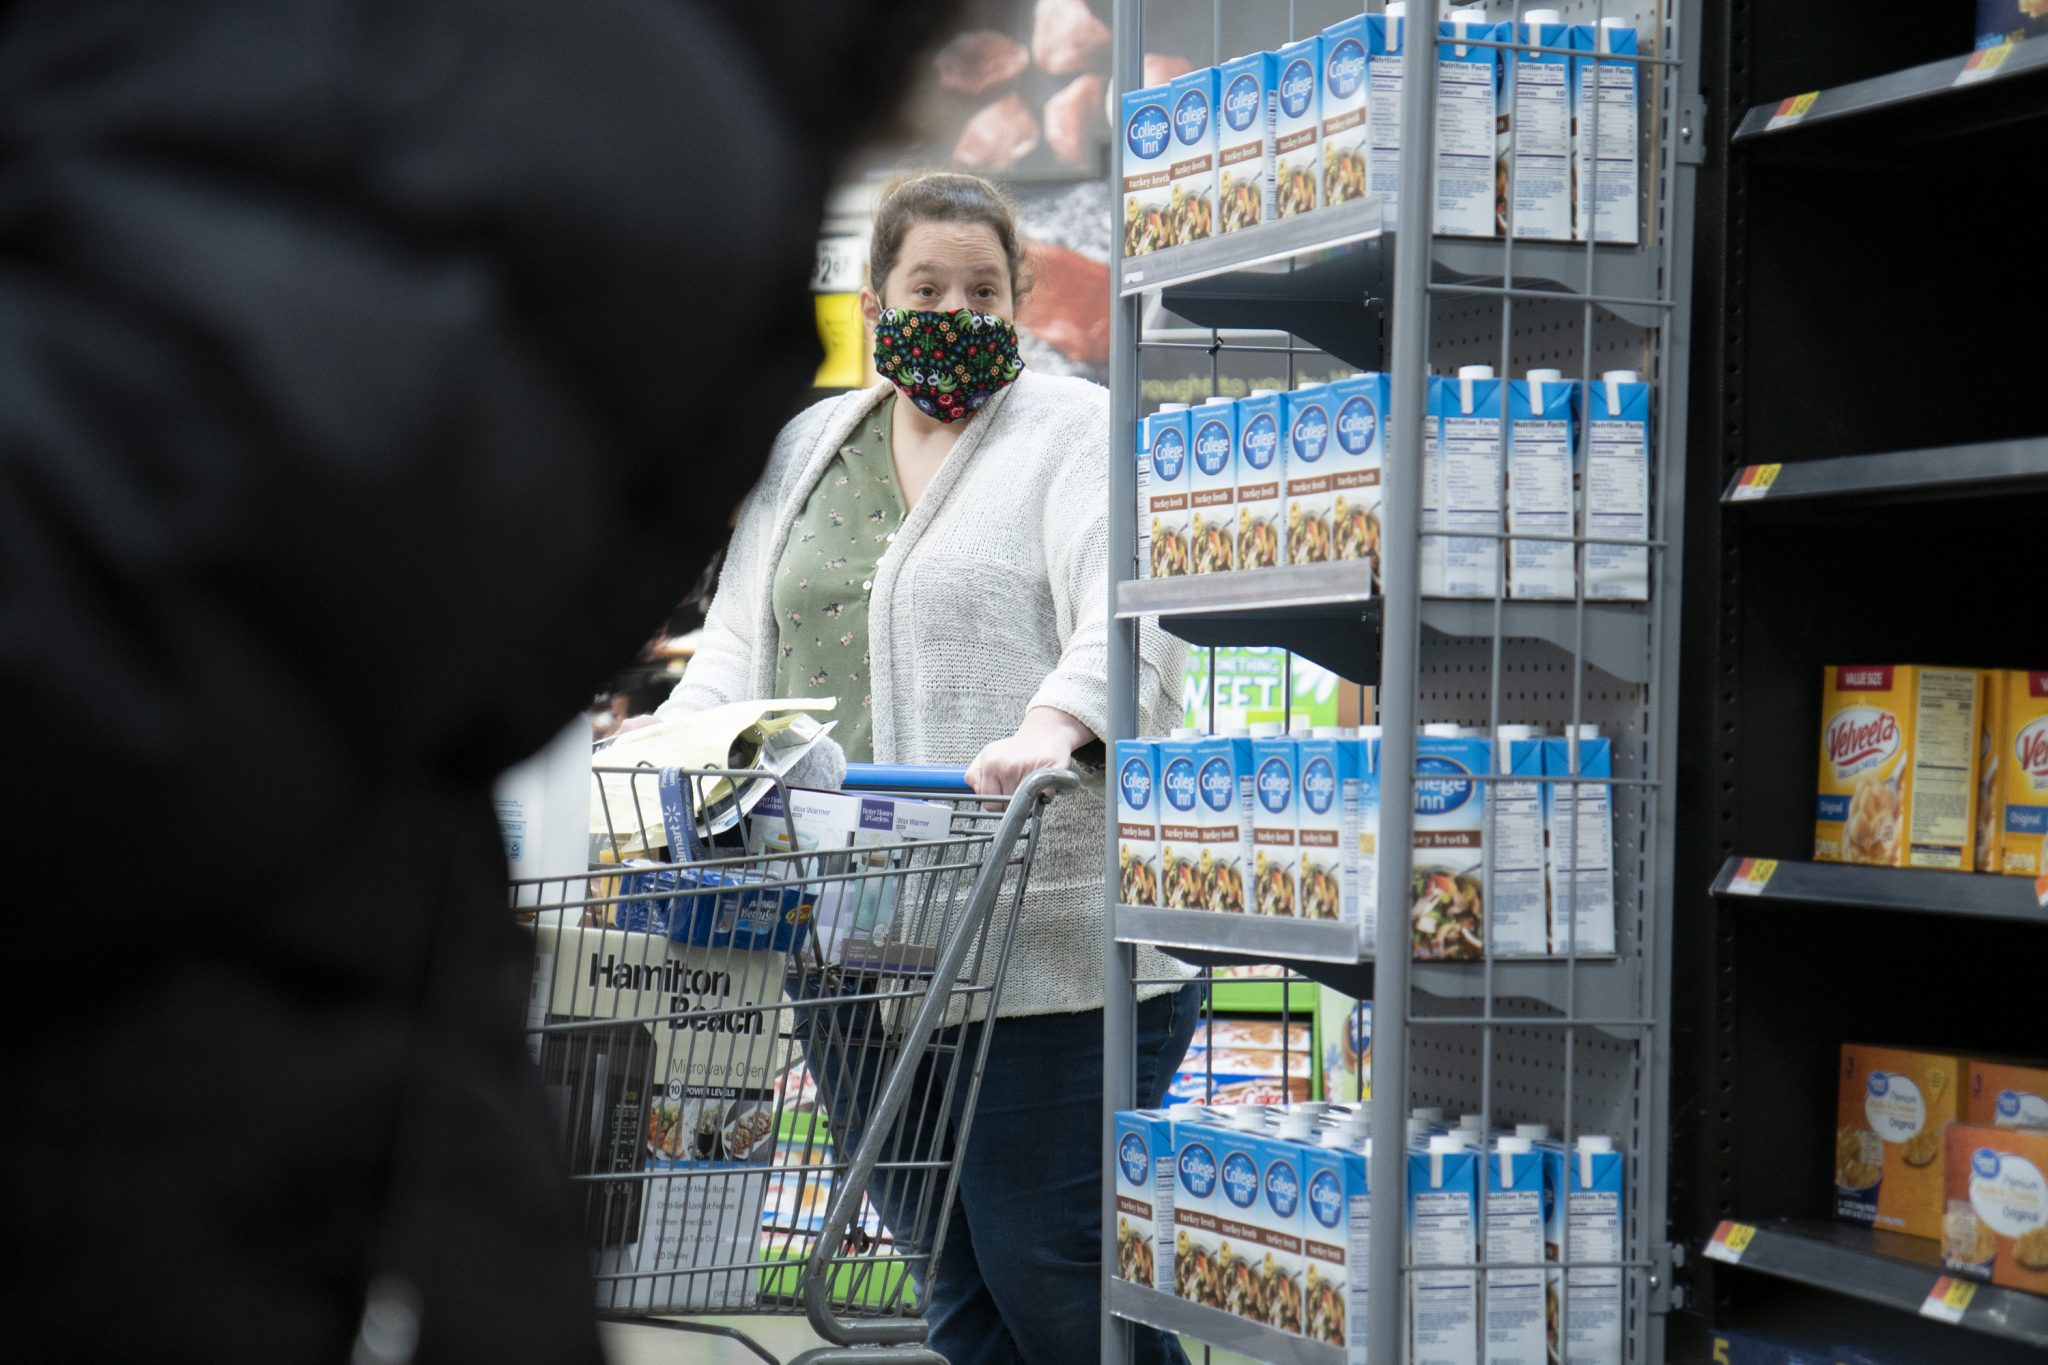 Illinois, United States, - April 10th 2020: A Walmart customer ina  face mask attempting to get groceries during the pandemic.